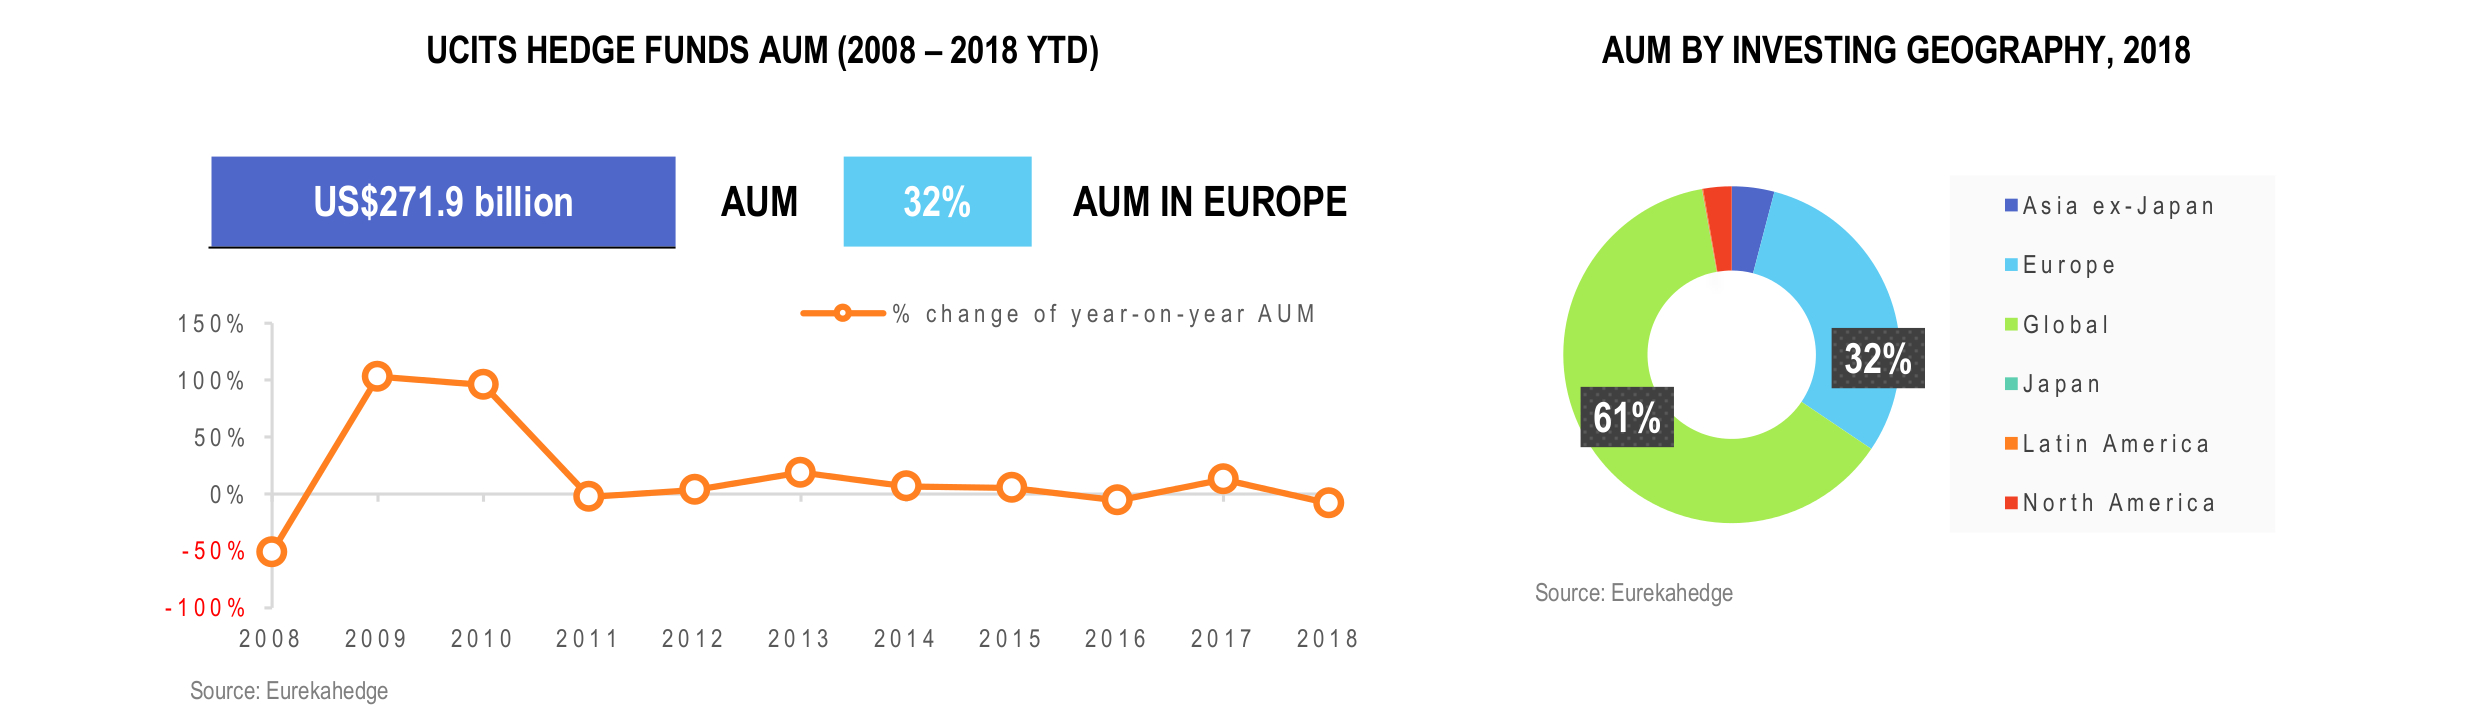 UCITS Hedge Funds Infographic February 2019 - AUM